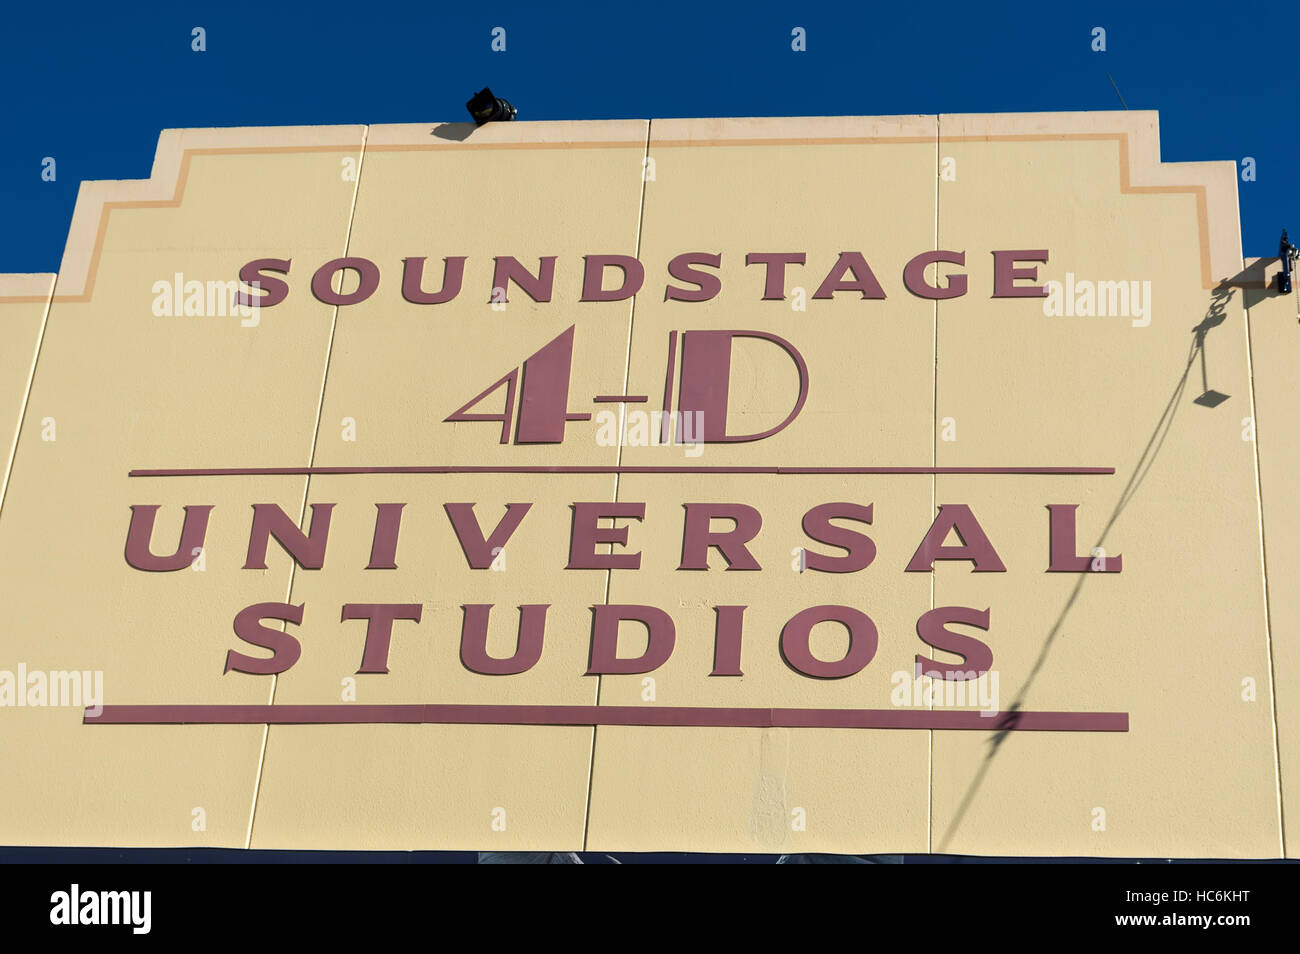 Entrance to Shrek 4D ride in soundstage. Stock Photo